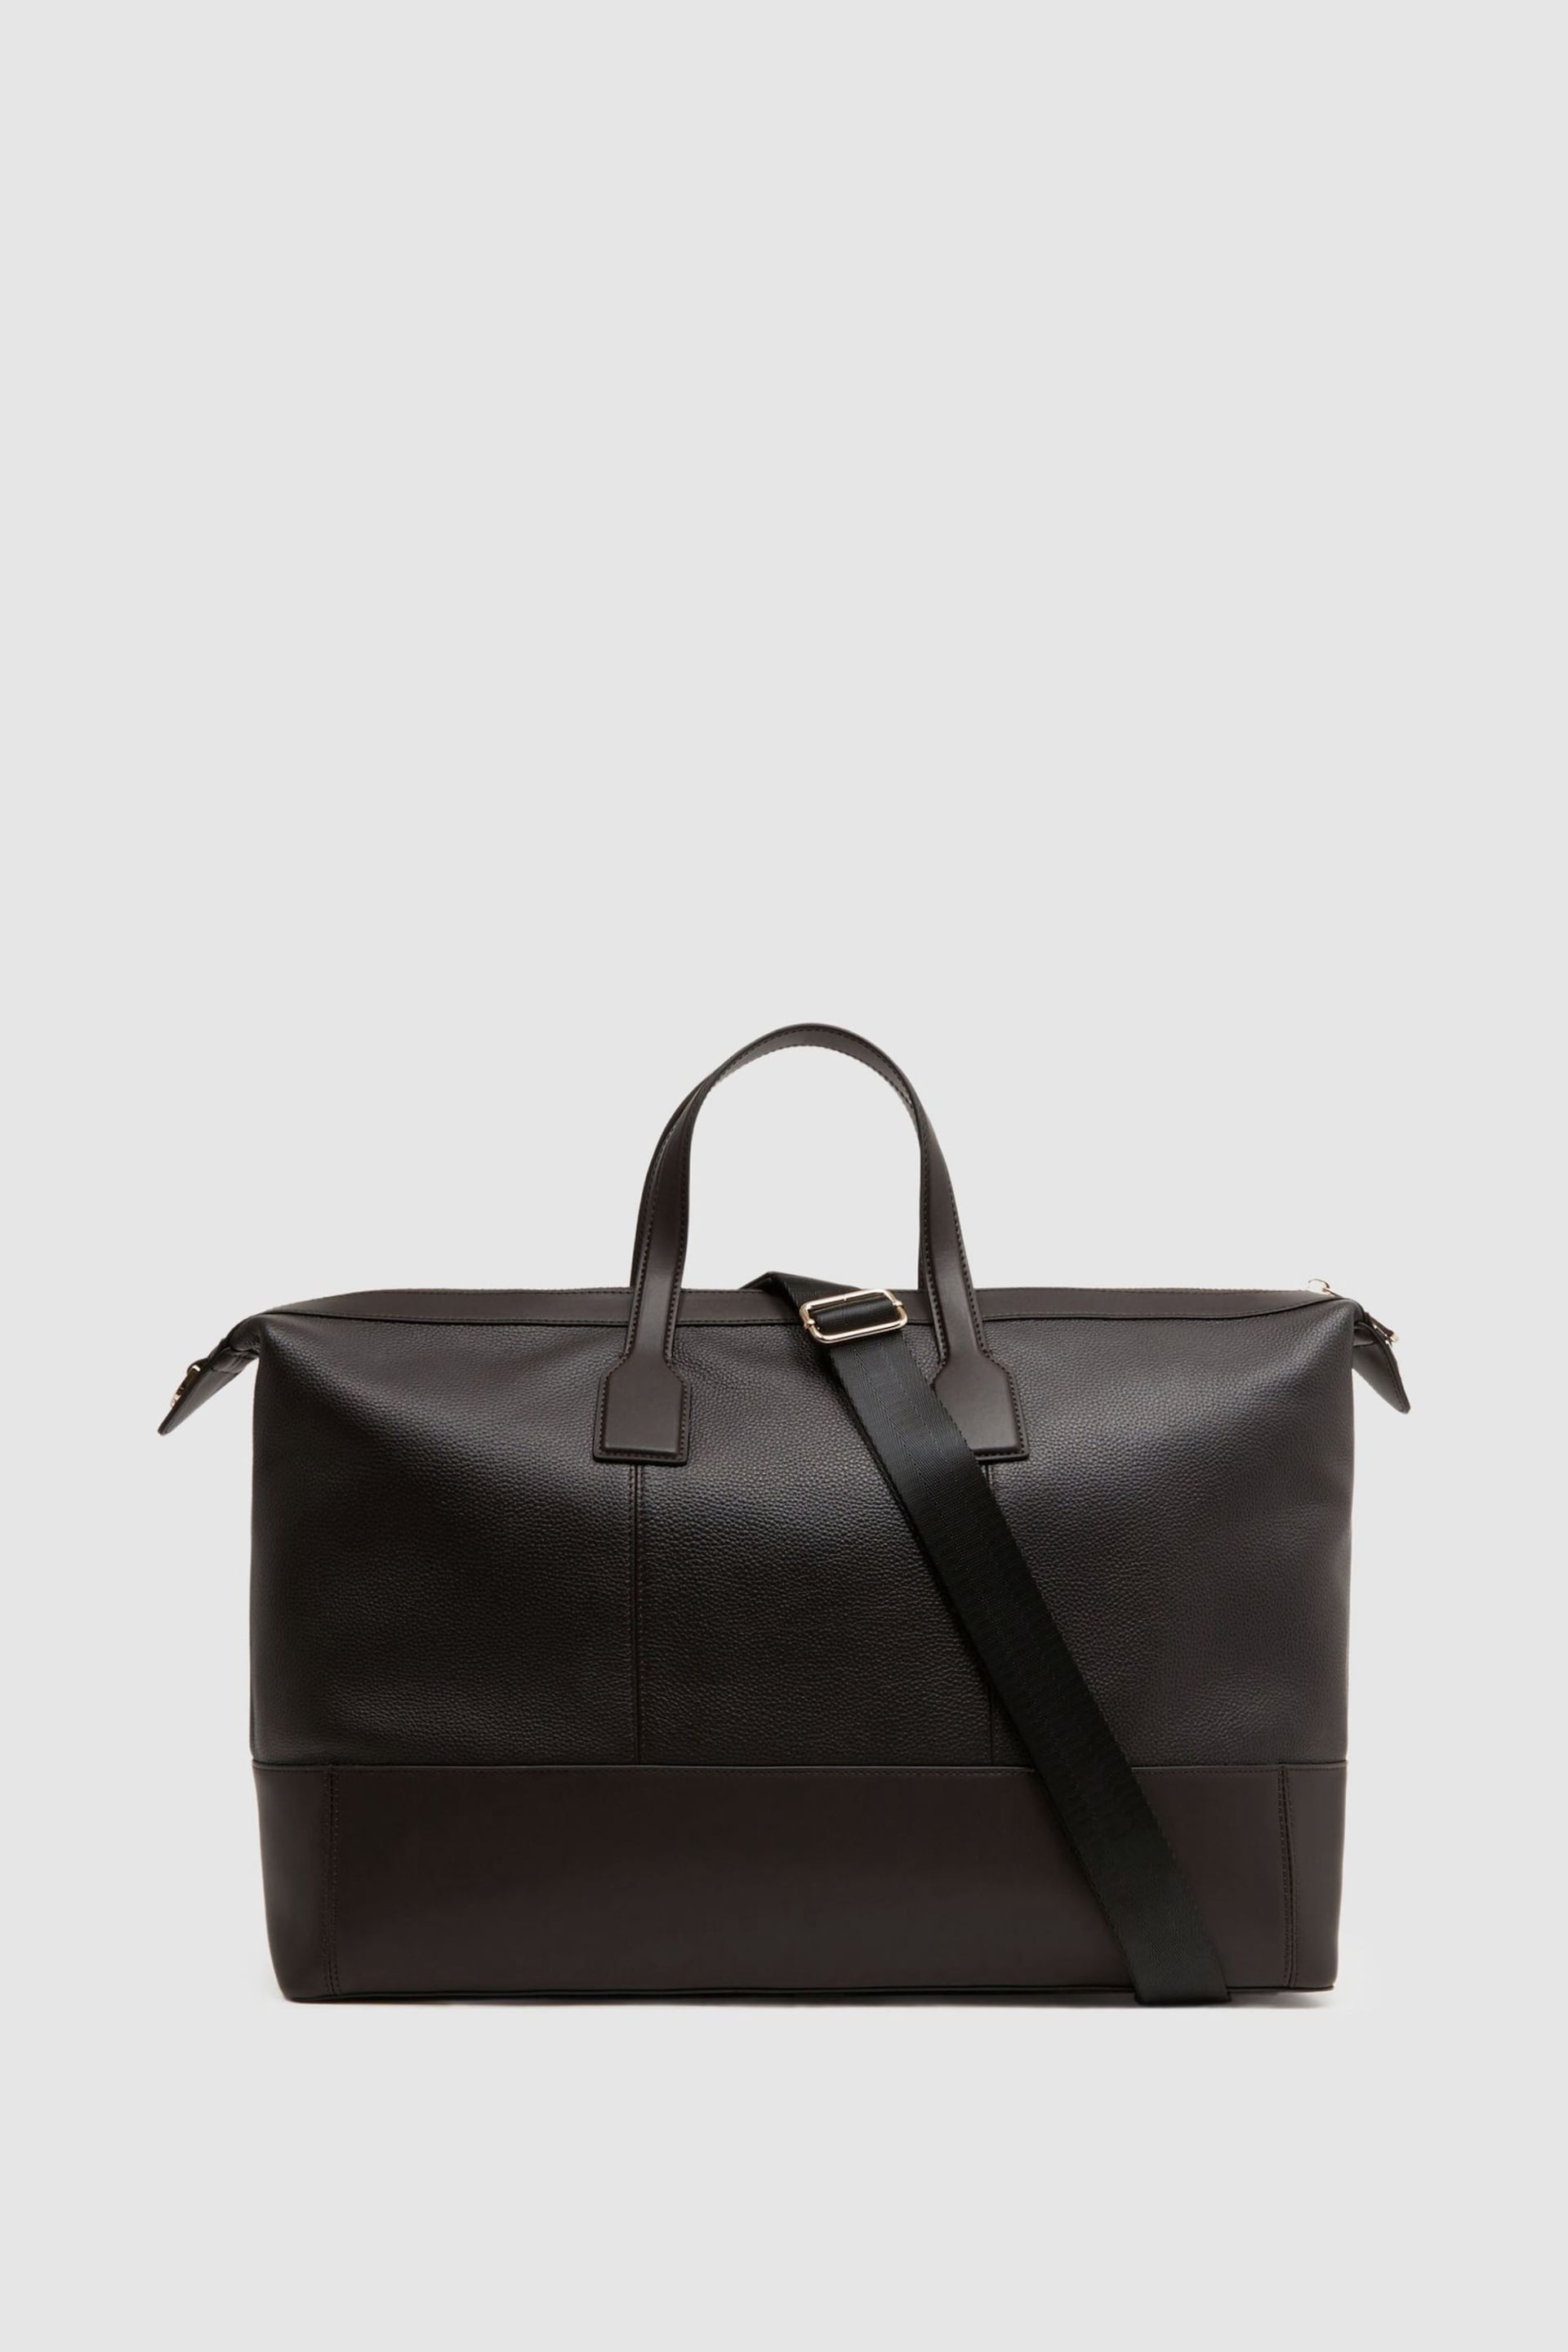 Reiss Chocolate Carter Leather Holdall - Image 4 of 5